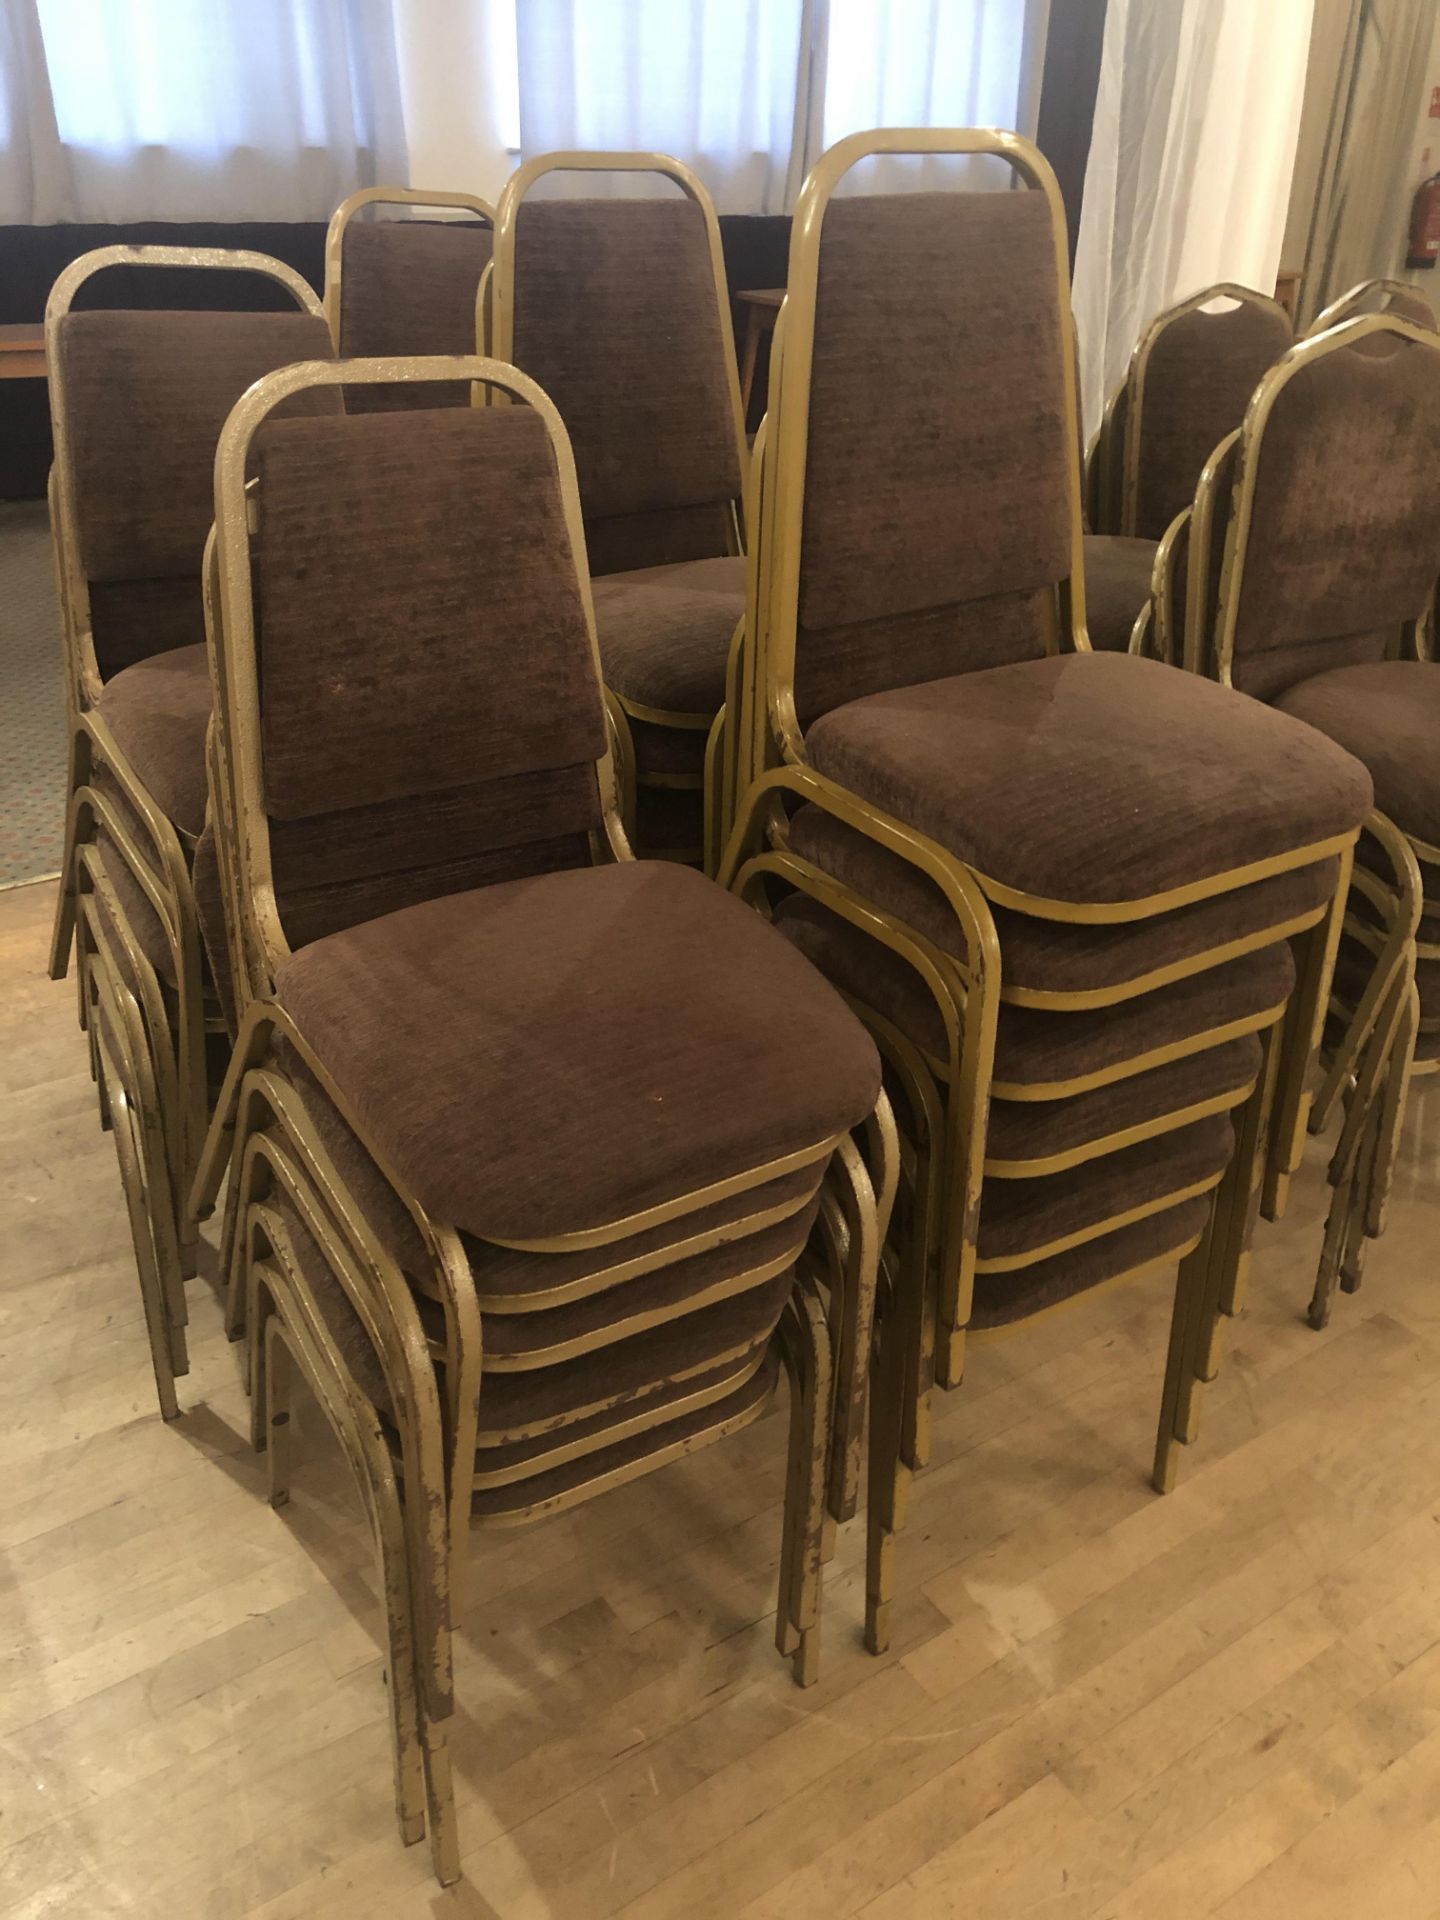 30 x Fabric Banquet Chairs in Brown - Image 3 of 4